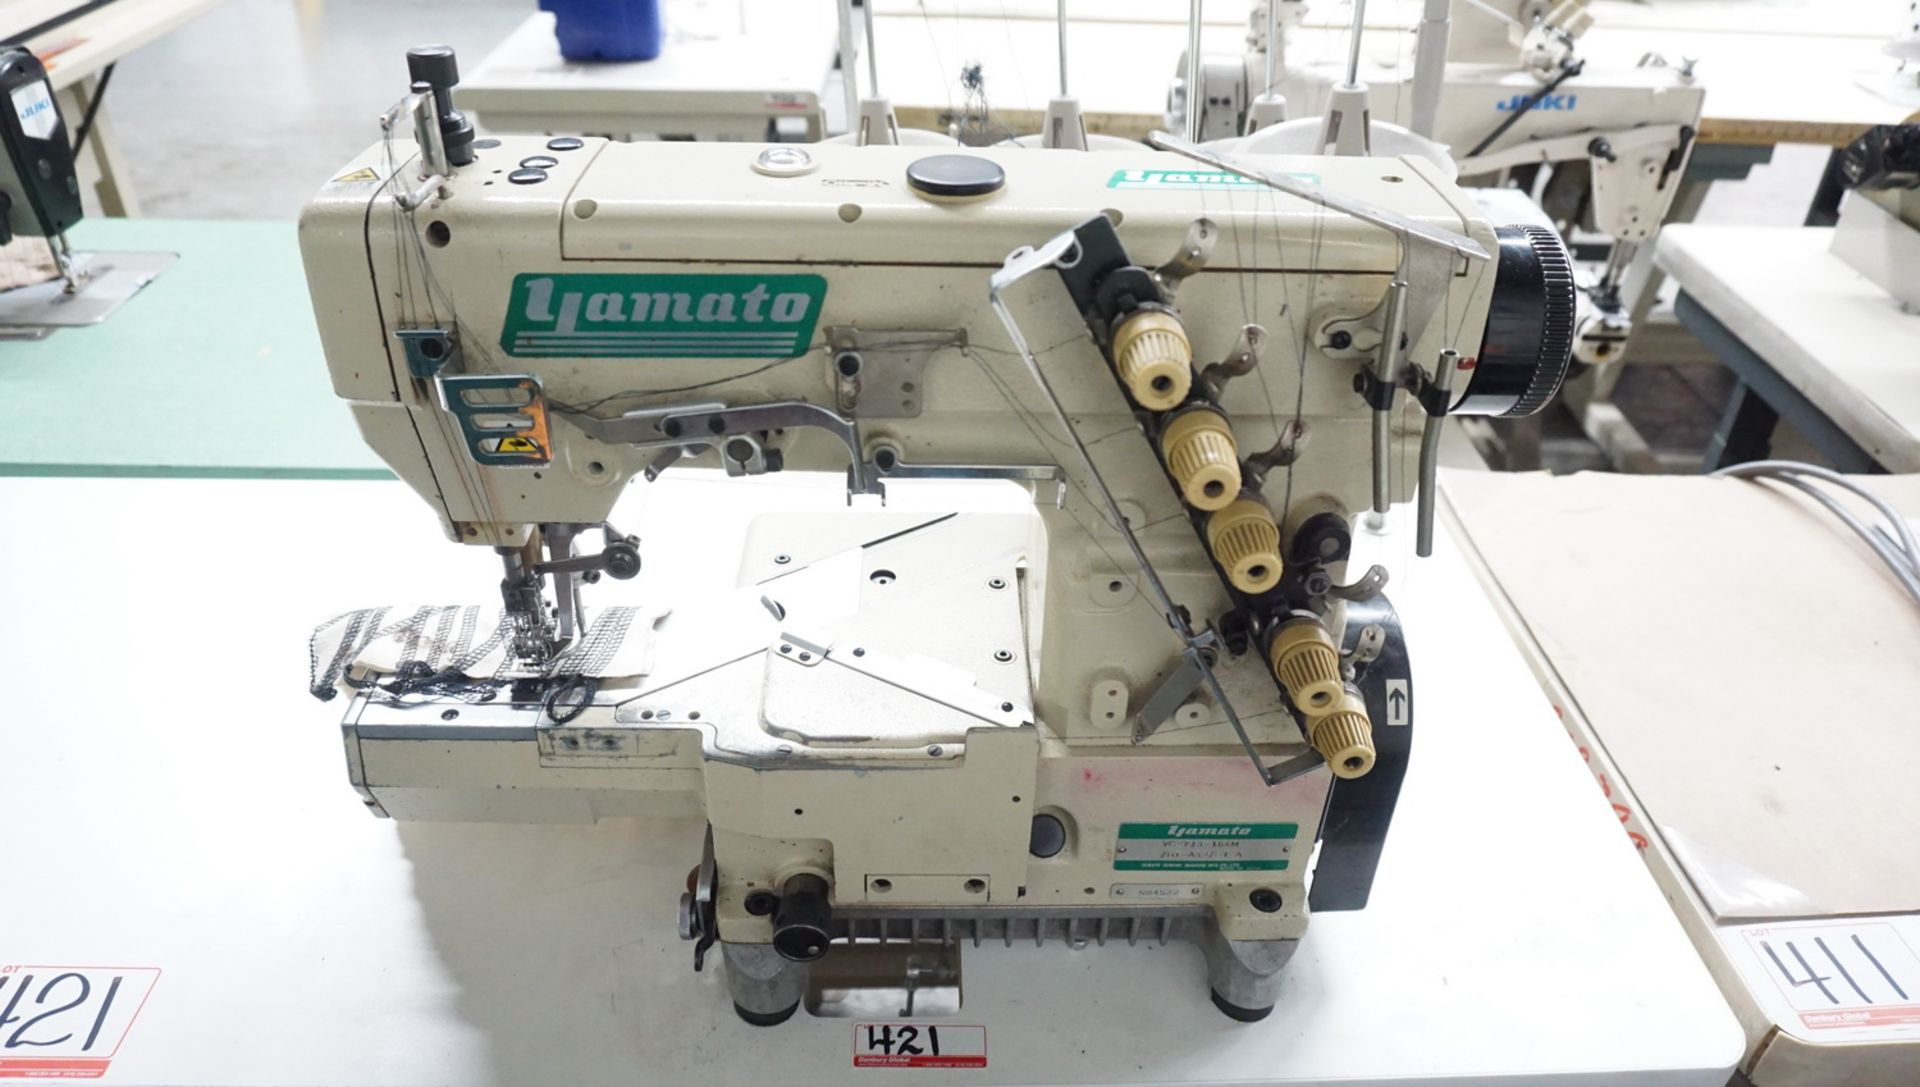 YAMATO VC2713-164M/UT-A32/ST-A 3-NEEDLE CYLINDER COVERSTITCH MACHINE, S/N N84522 (LOCATED @ 101